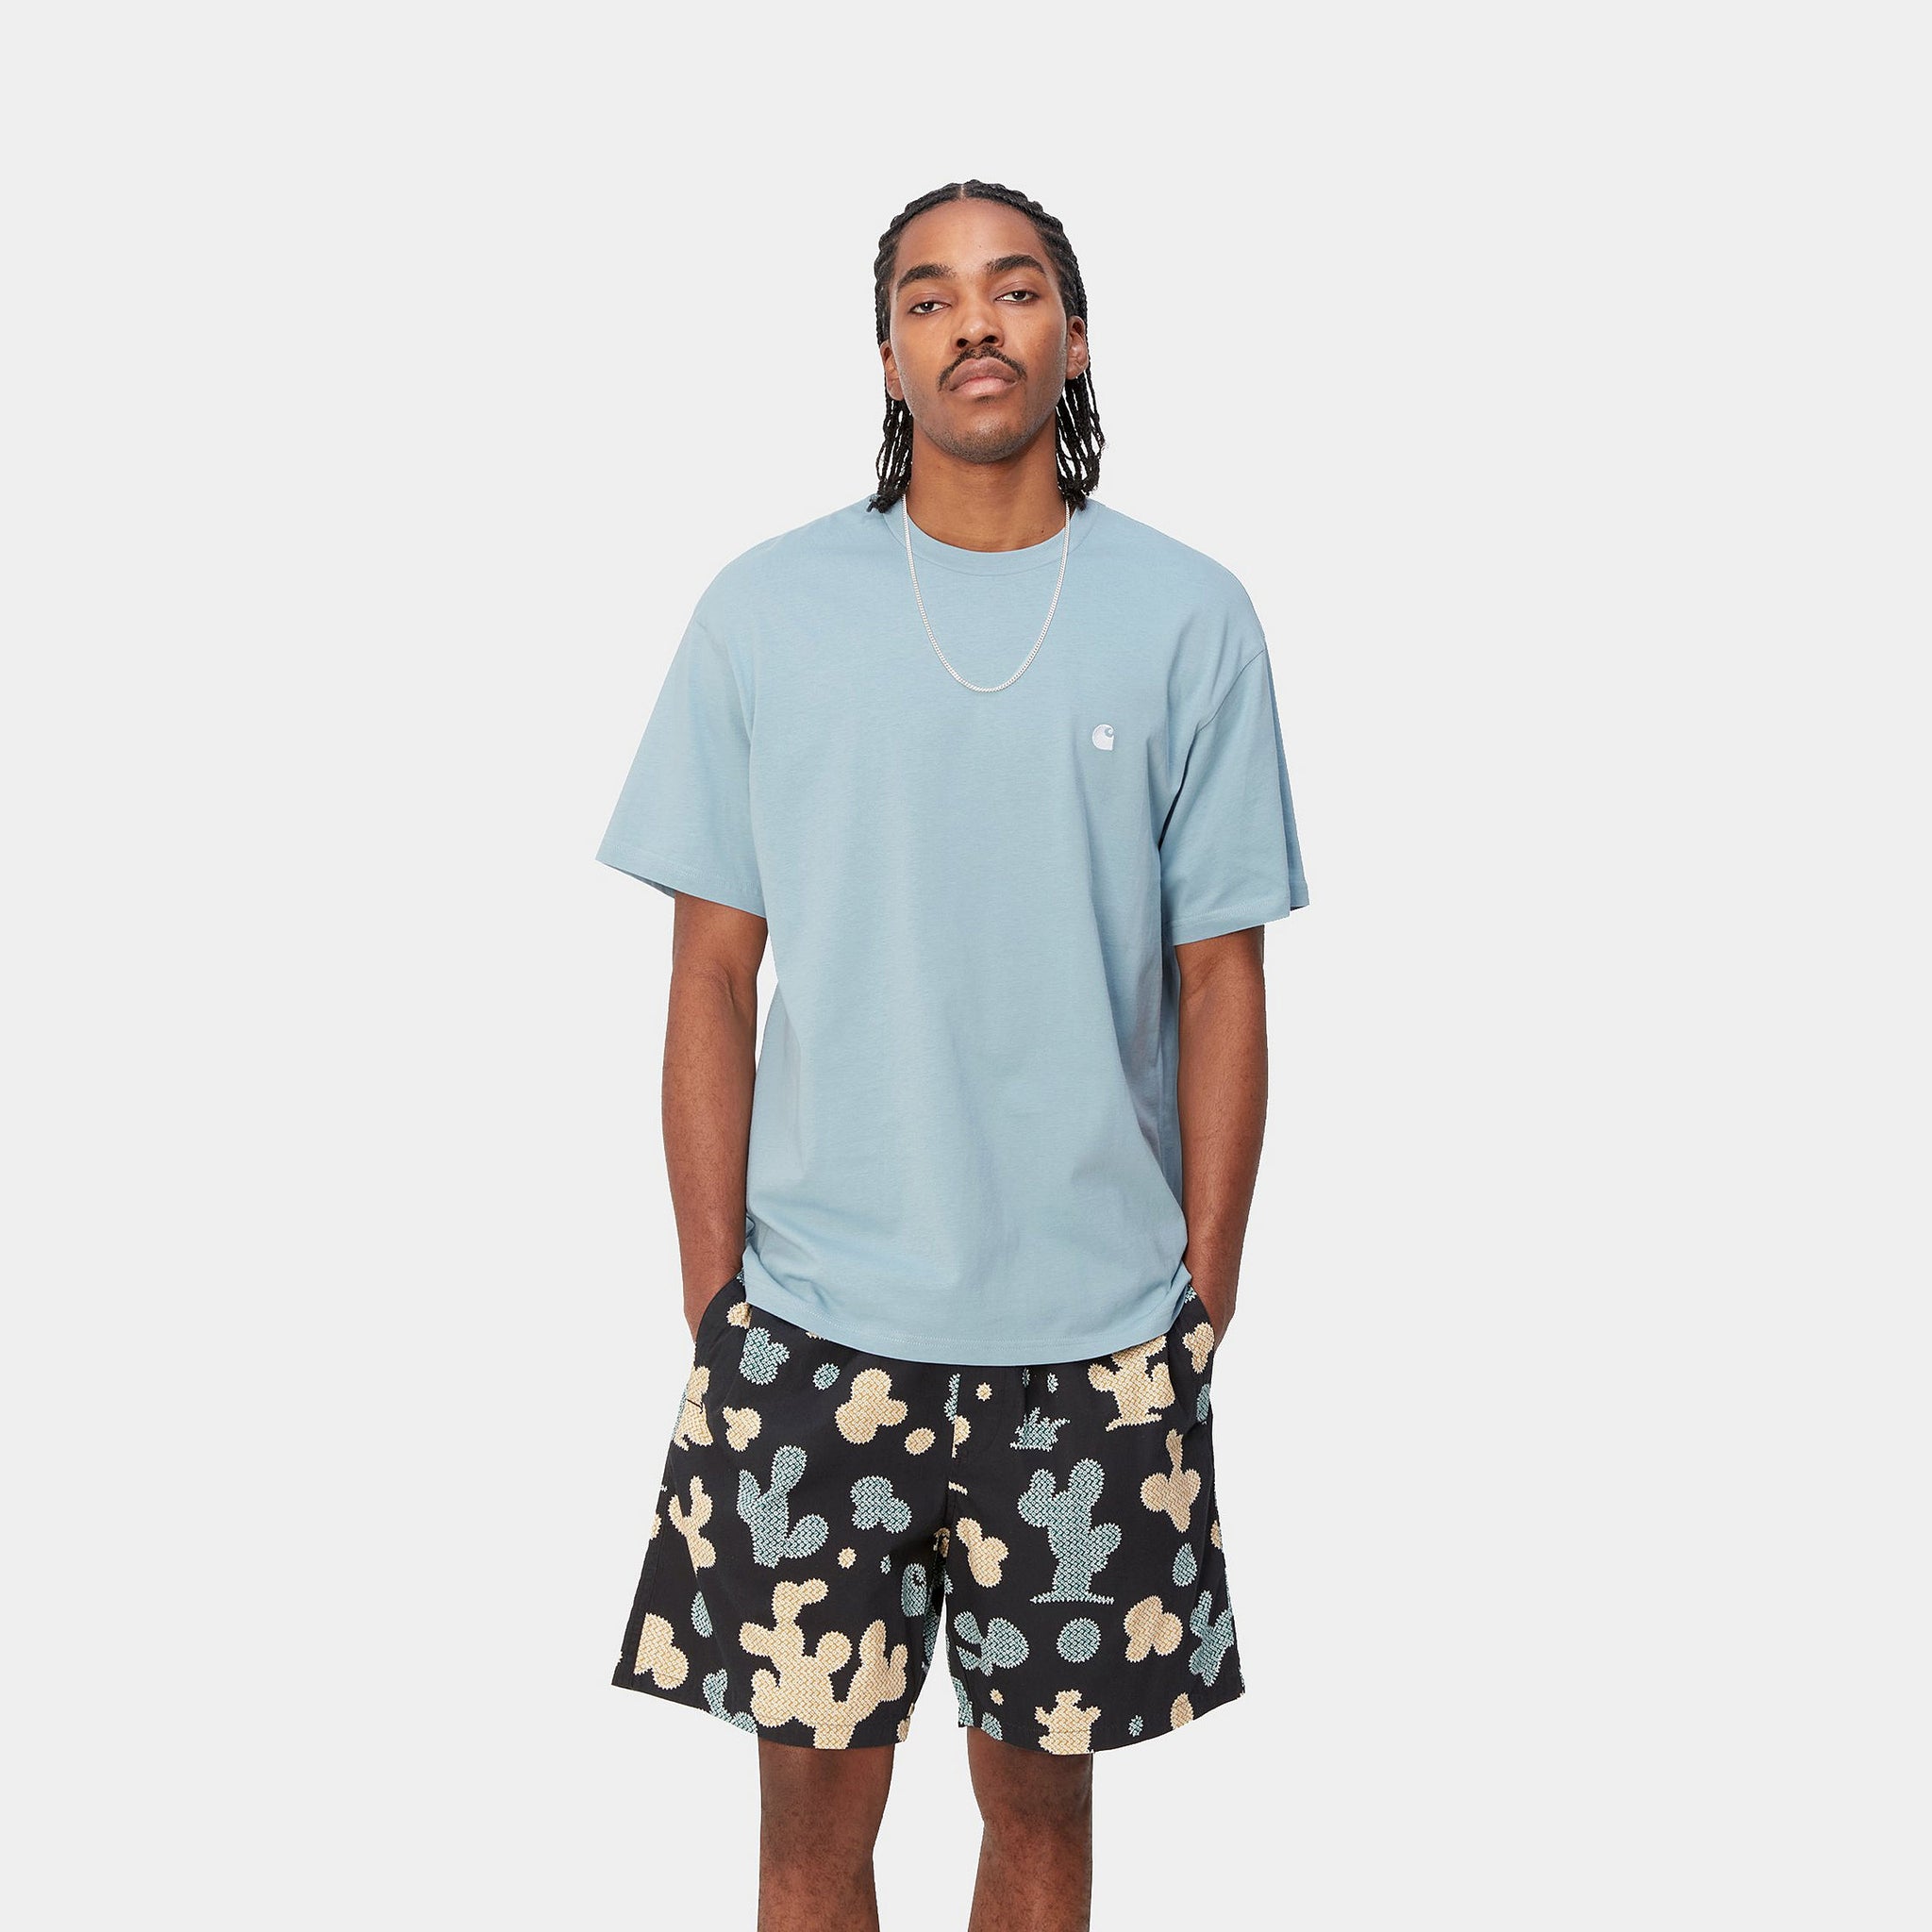 S/S Madison T-Shirt (Frosted Blue/ White)